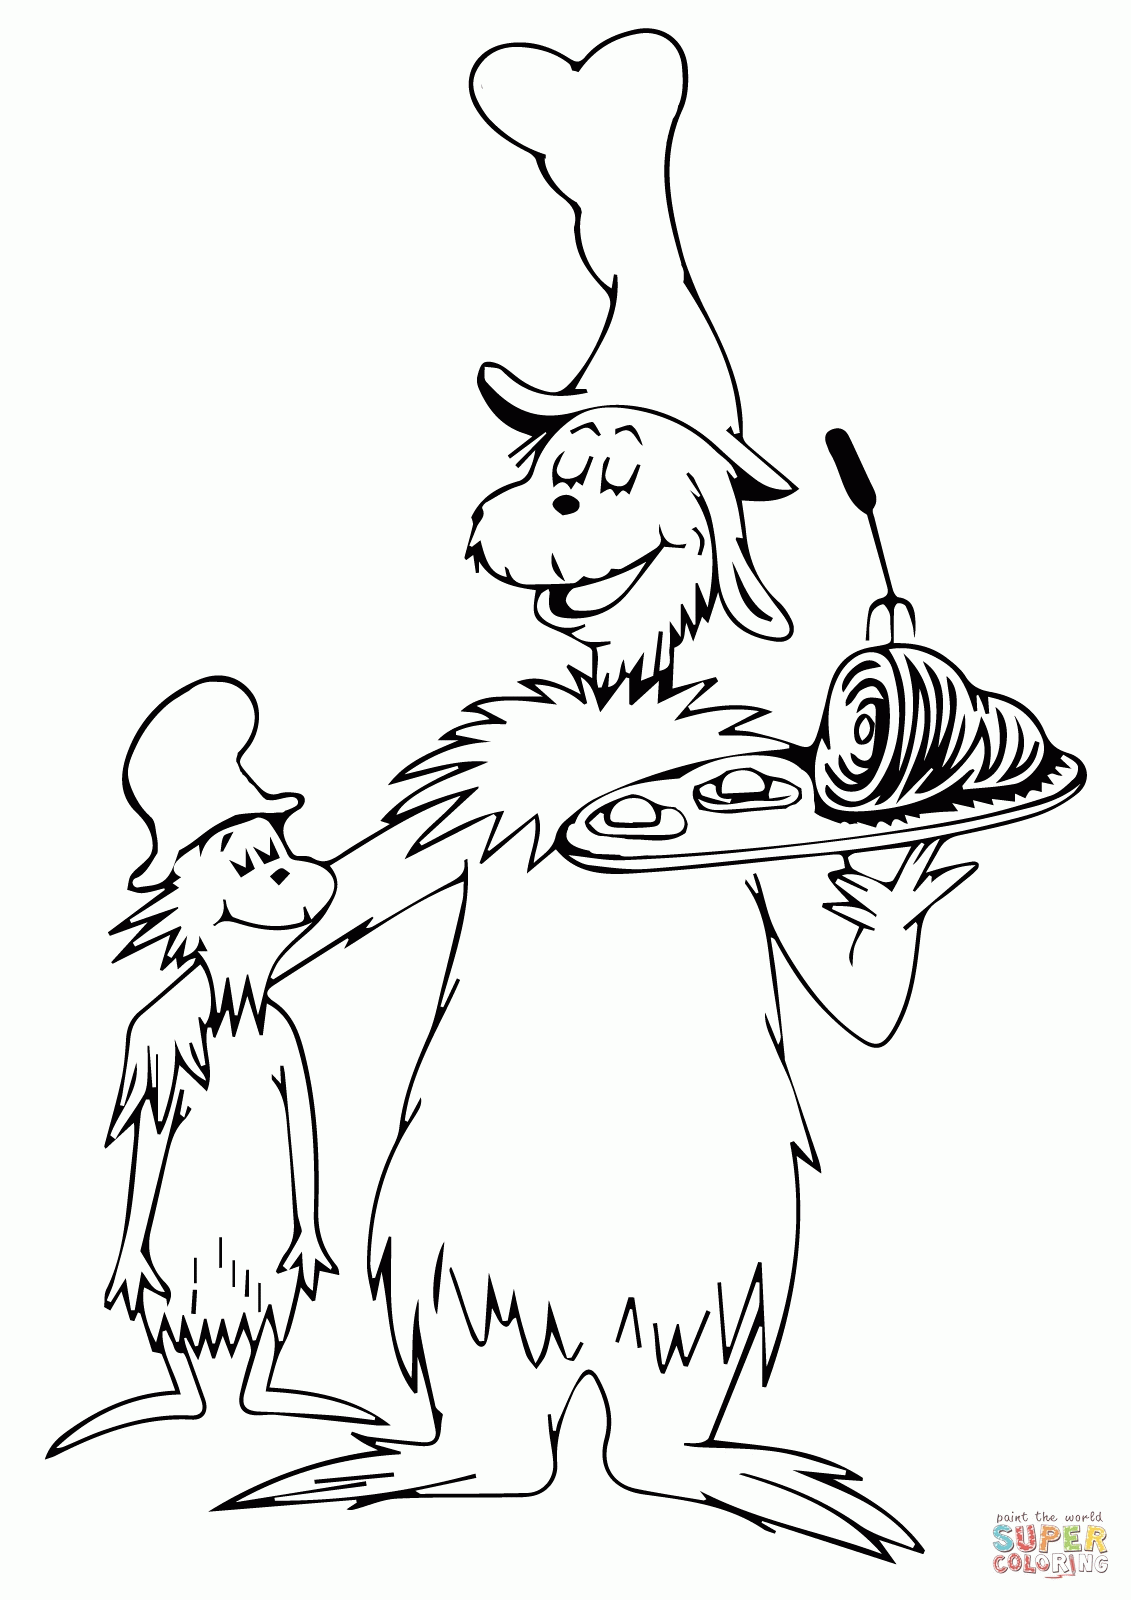 14 Free Pictures for: Dr Seuss Coloring Page. Temoon.us